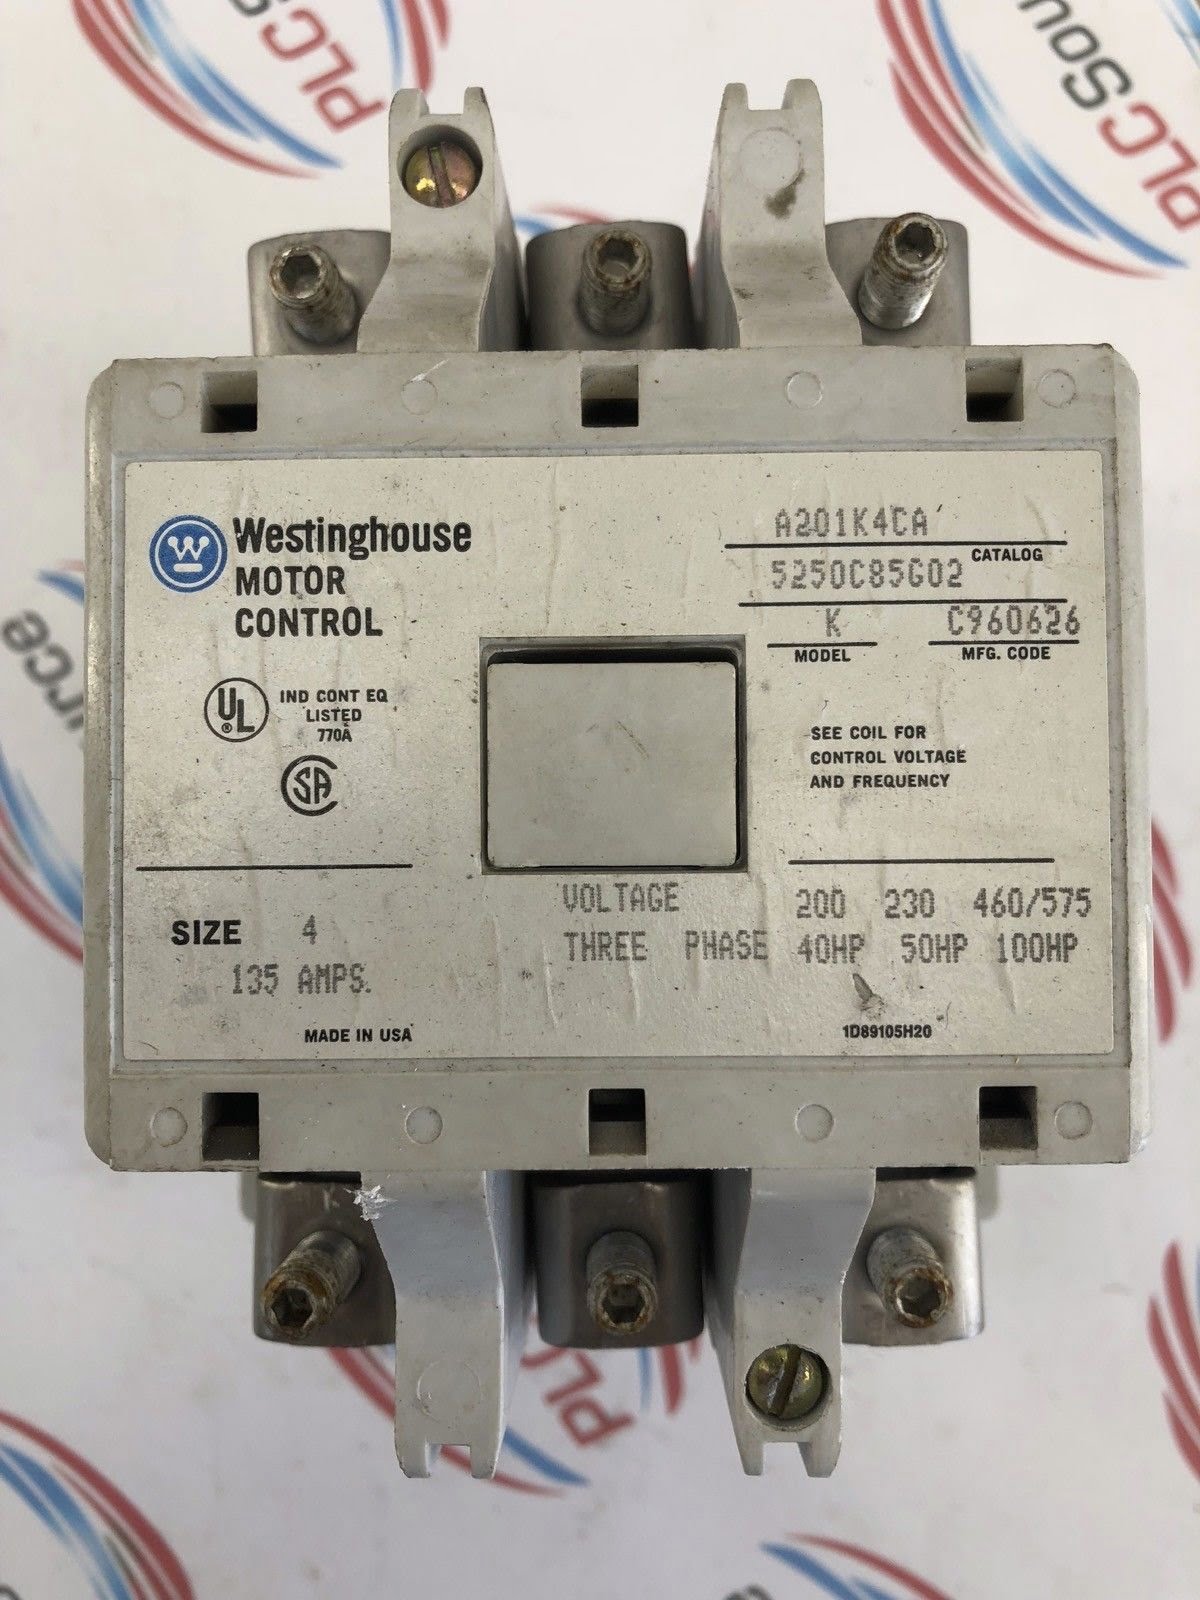 Westinghouse A201K4CA Industrial Control System for sale online 